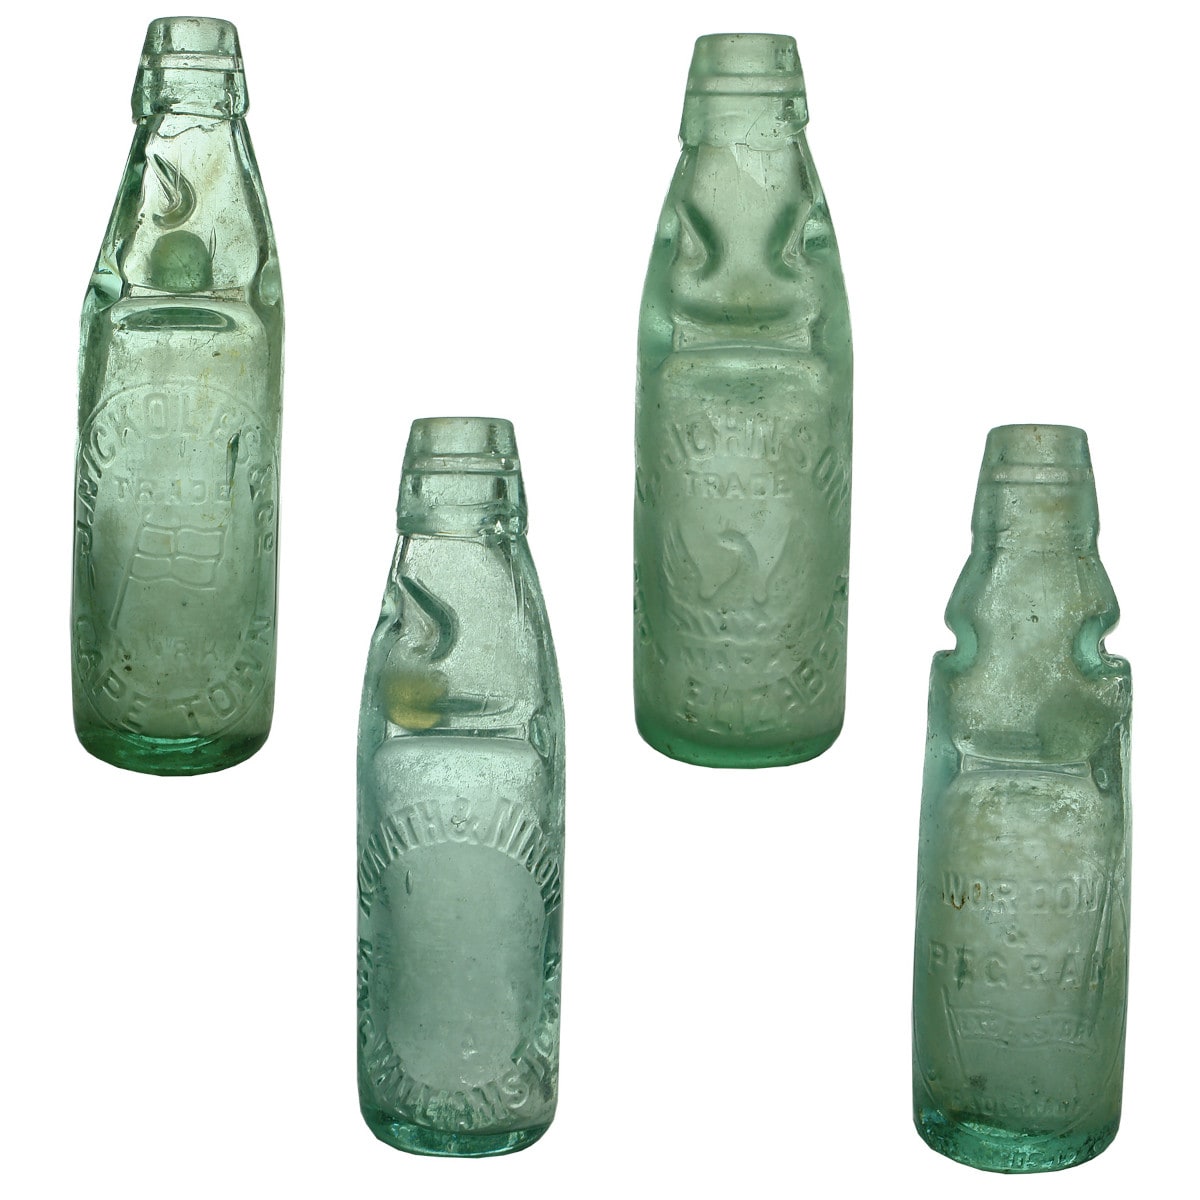 Four South African Marble Bottles: Nickoles & Co., Cape Town; Kunath & Ninow, King Williams Town; Johnson, Port Elizabeth; Wordon & Pegram, Rondebosch. (South Africa)